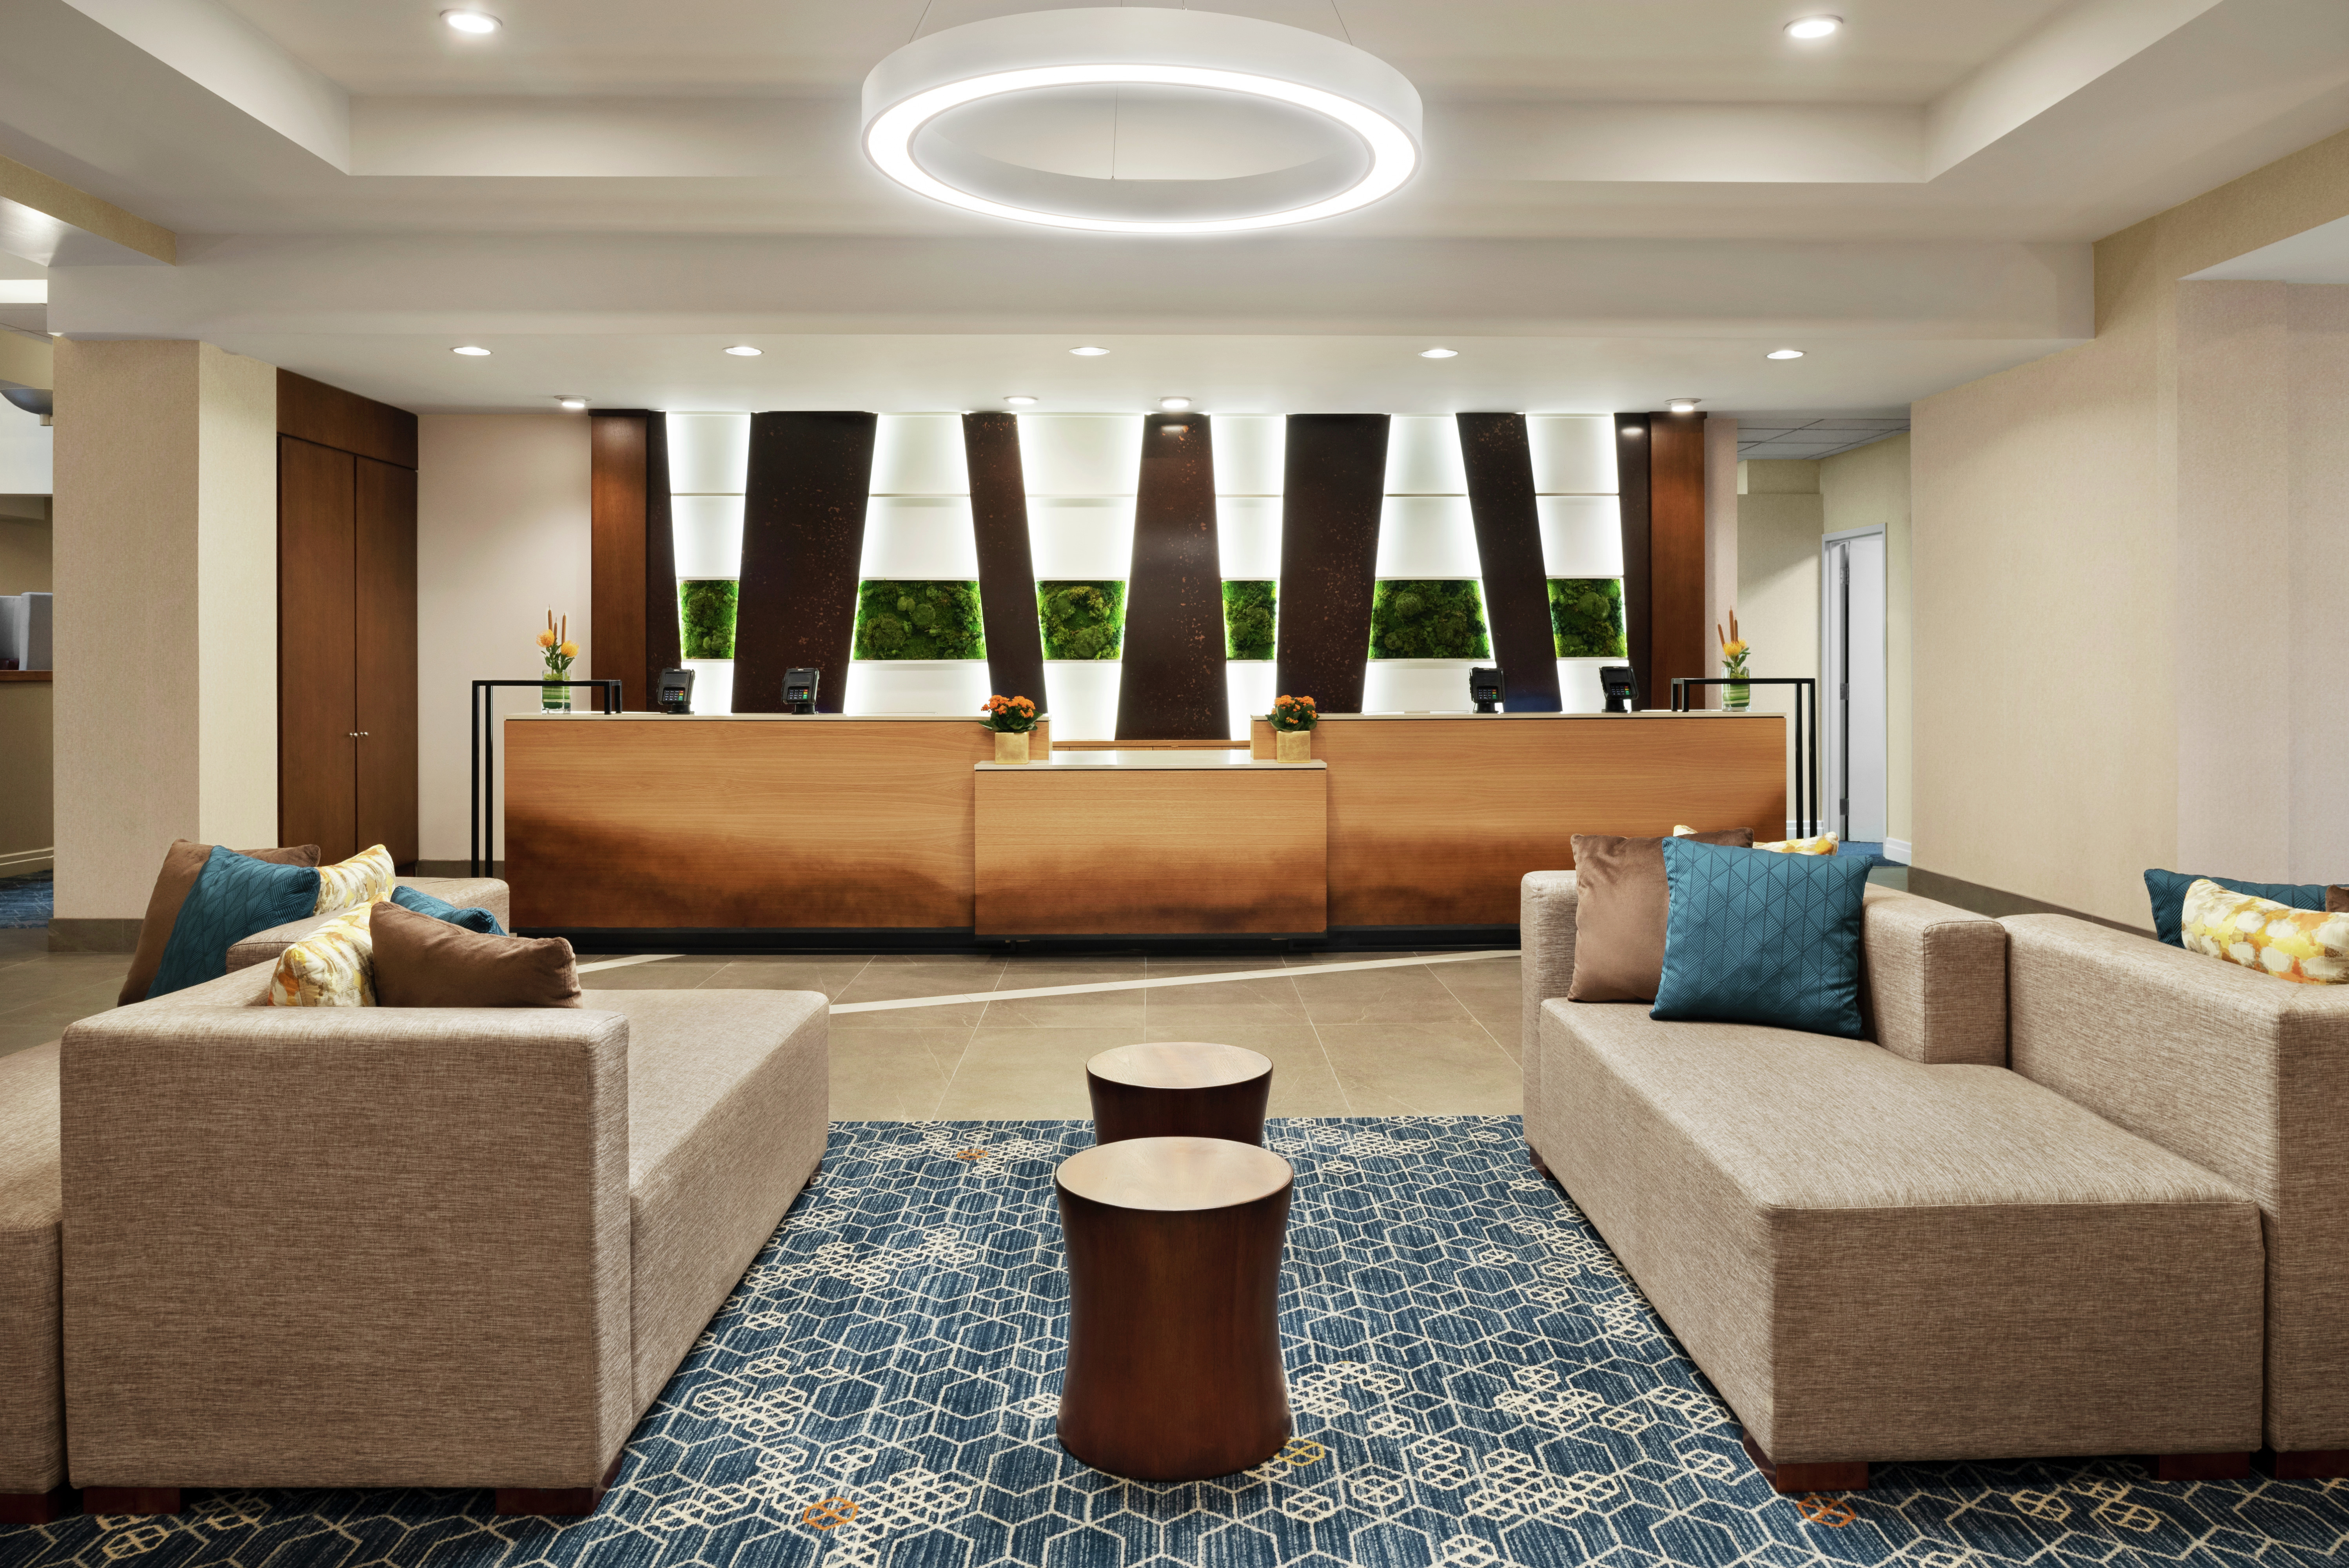 Front Desk and Lounge Area